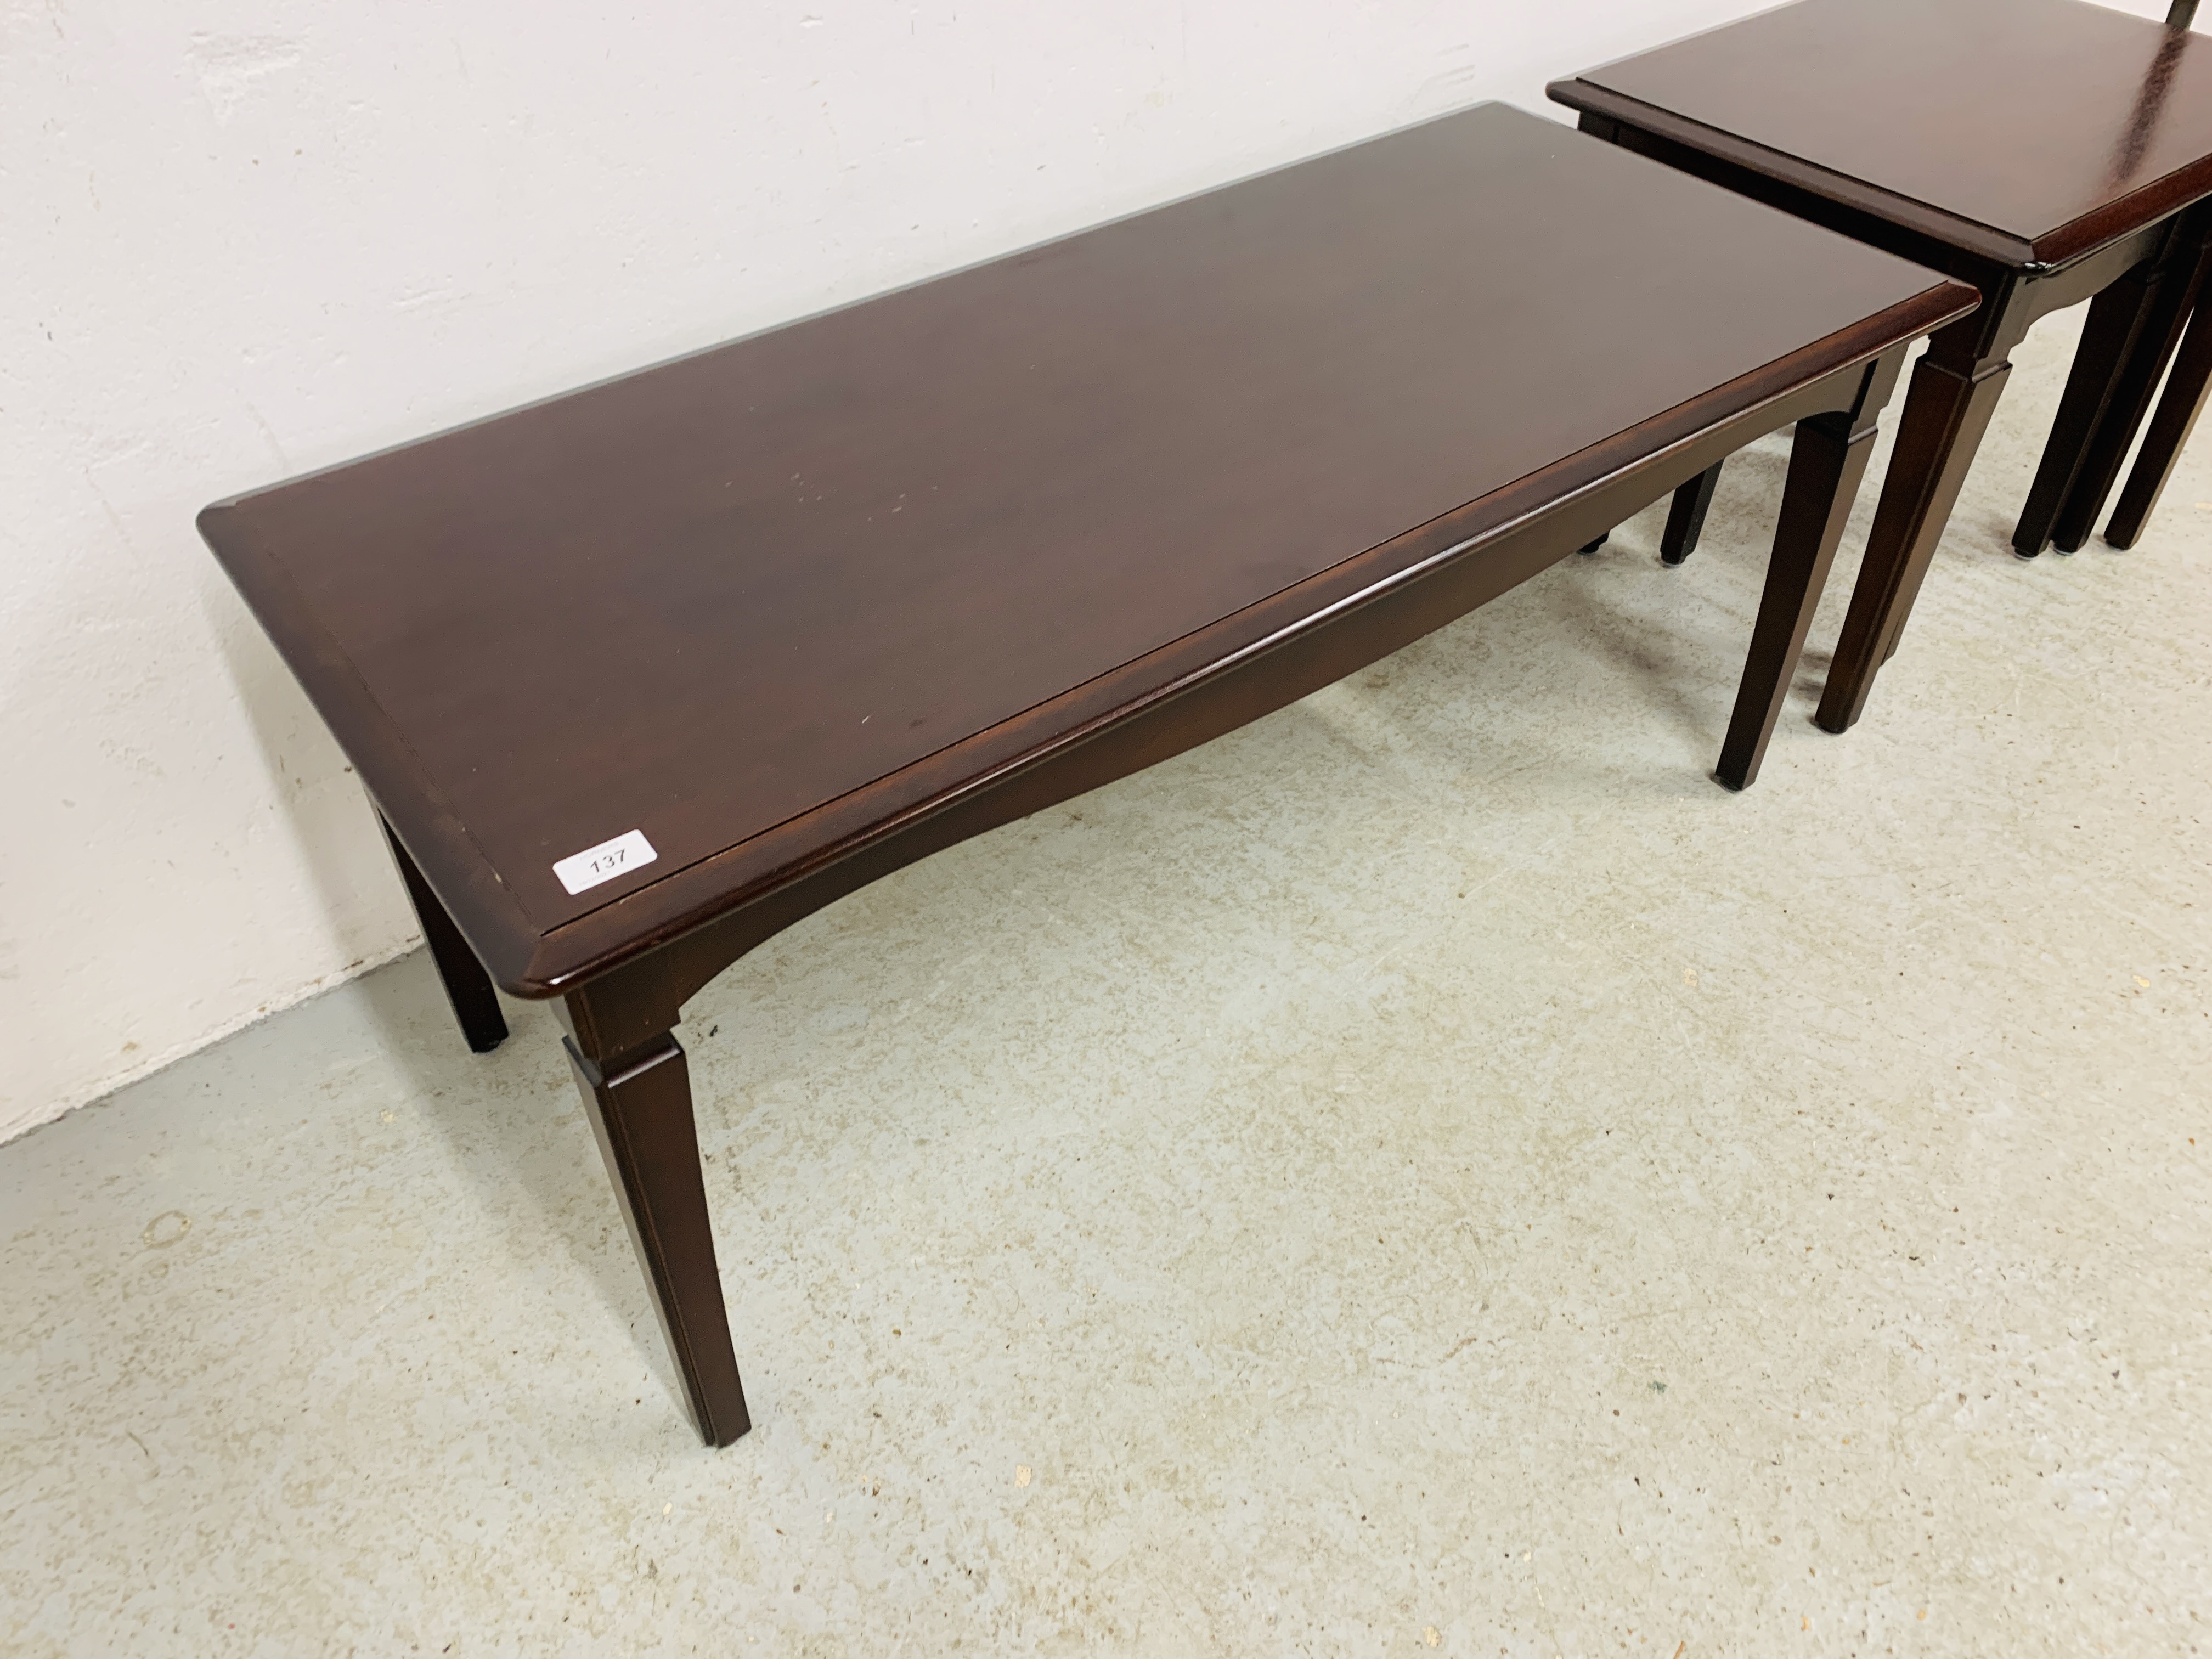 A STAG MINSTRAL RECTANGULAR COFFEE TABLE - W 46CM. L 103 CM. H 46CM. - Image 6 of 8